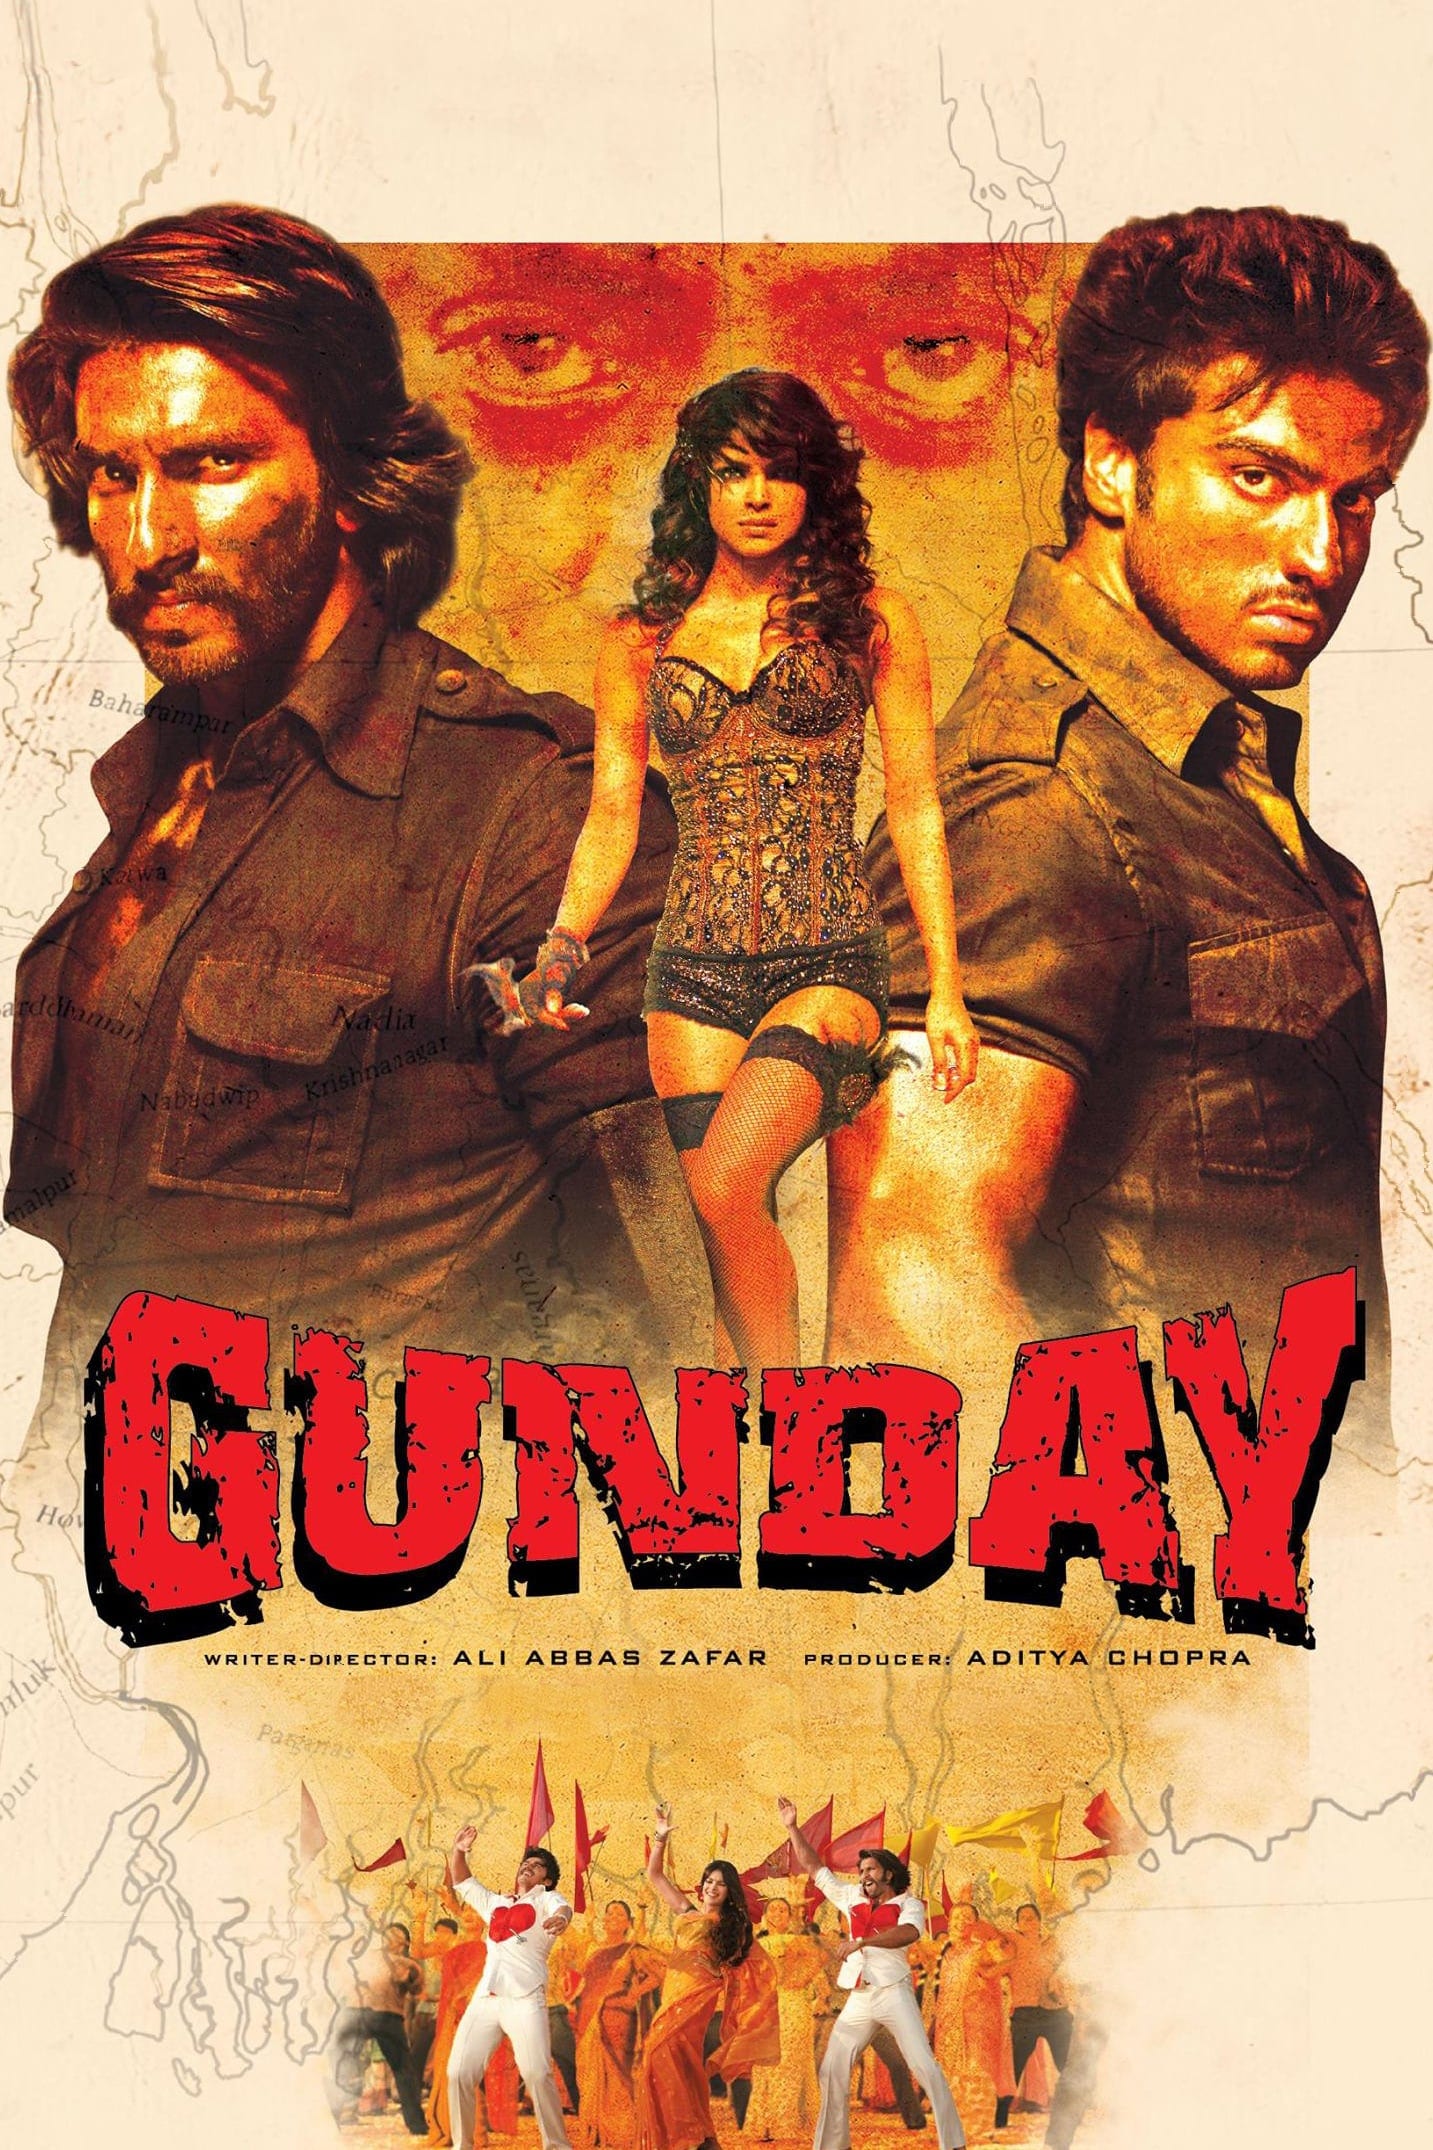 Poster for the movie "Gunday"